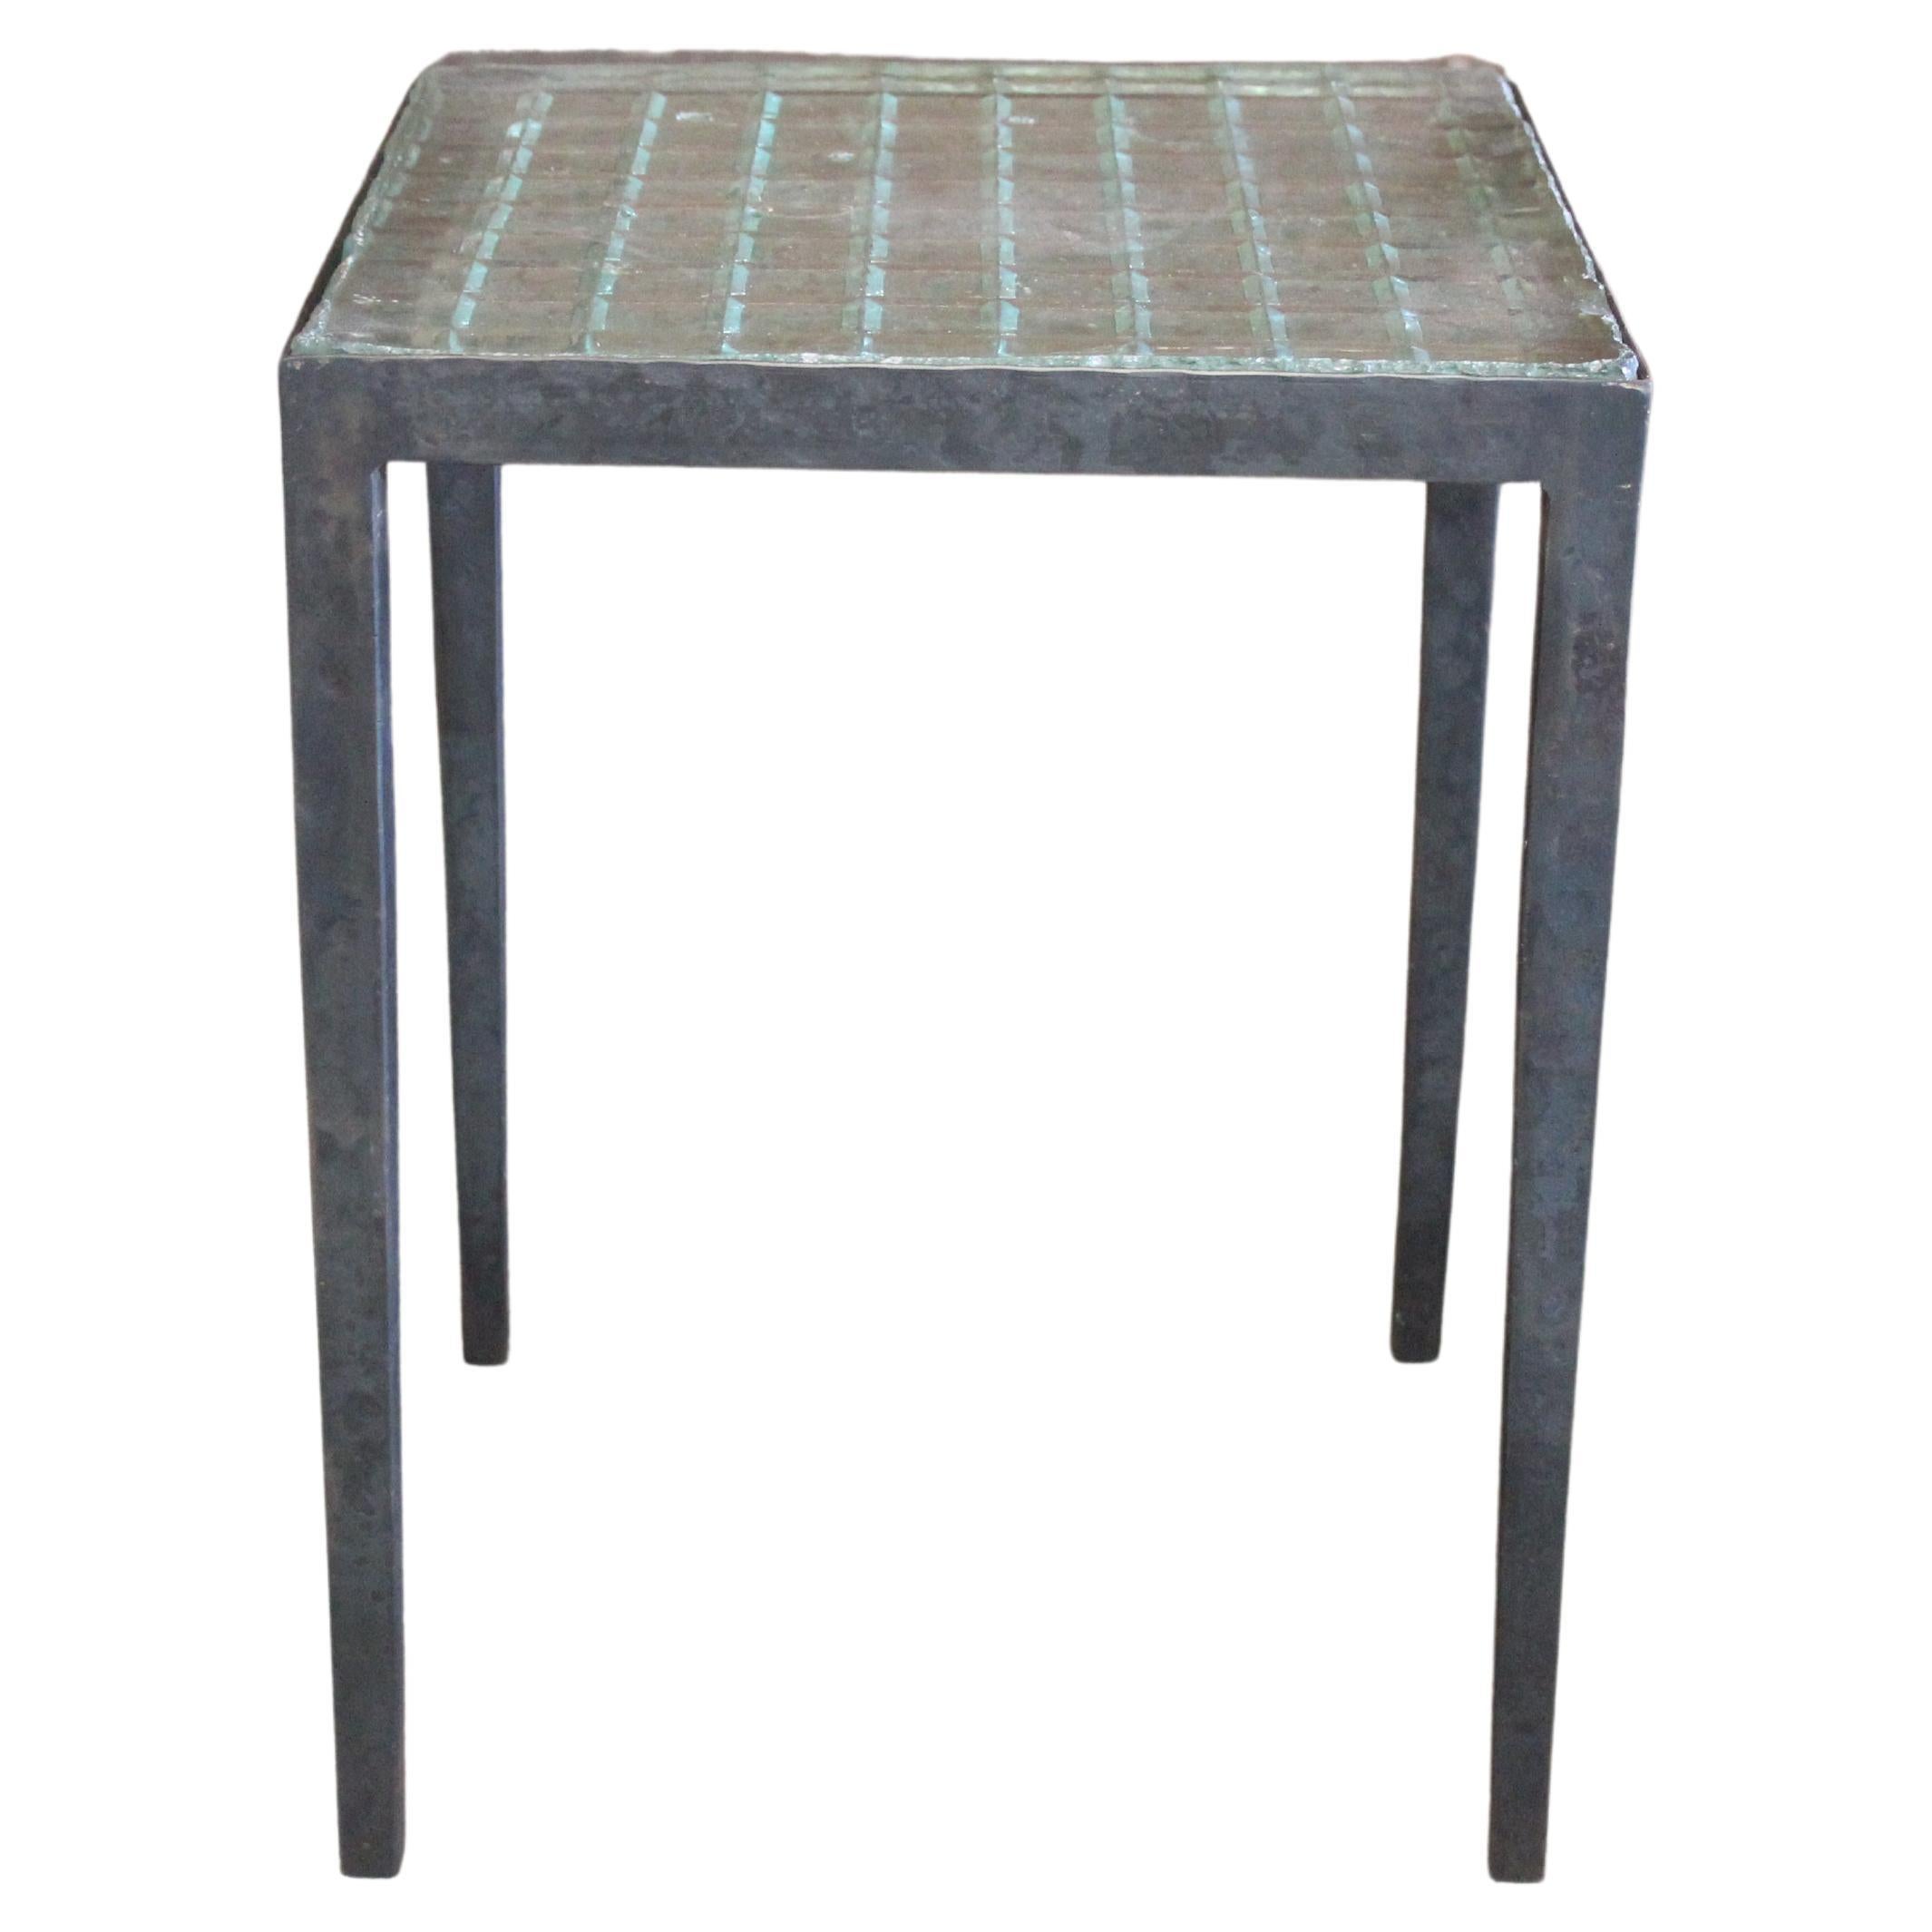 Iron Side Table with Saint-Gobain Glass in the Manner of Jean-Michel Frank